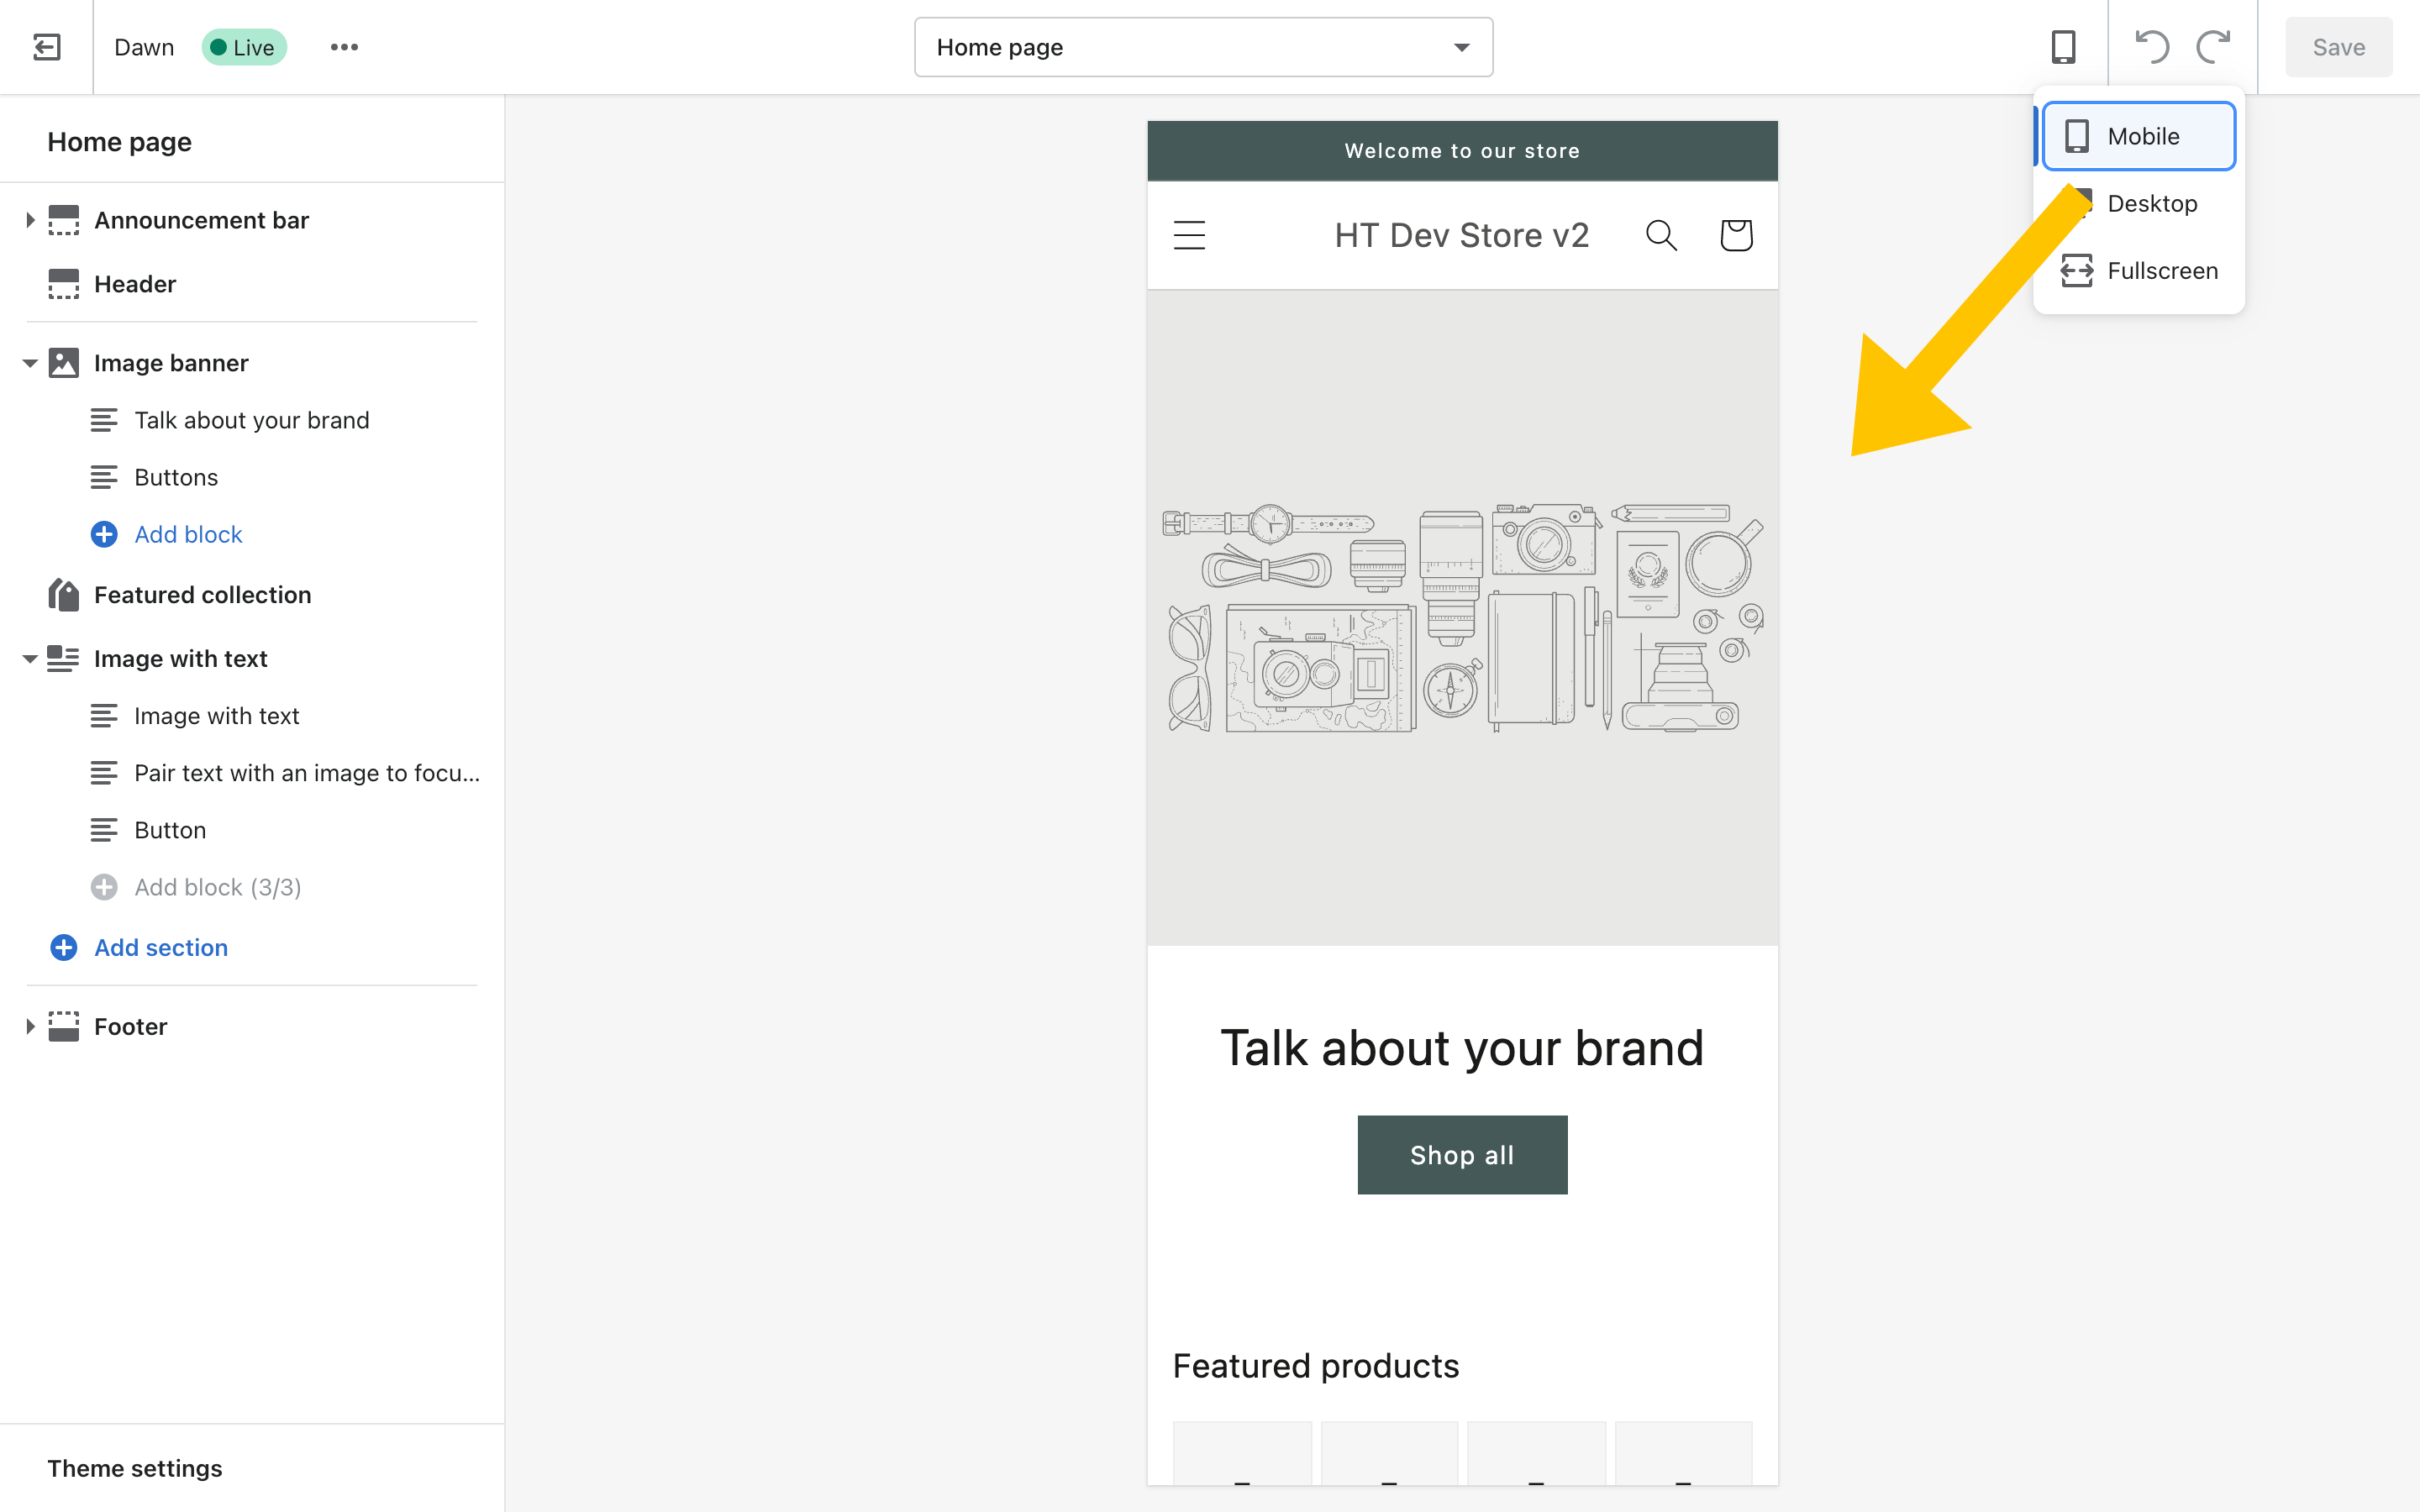 The default desktop view is replaced with a smaller version of the website seen through a frame shaped like a mobile device.